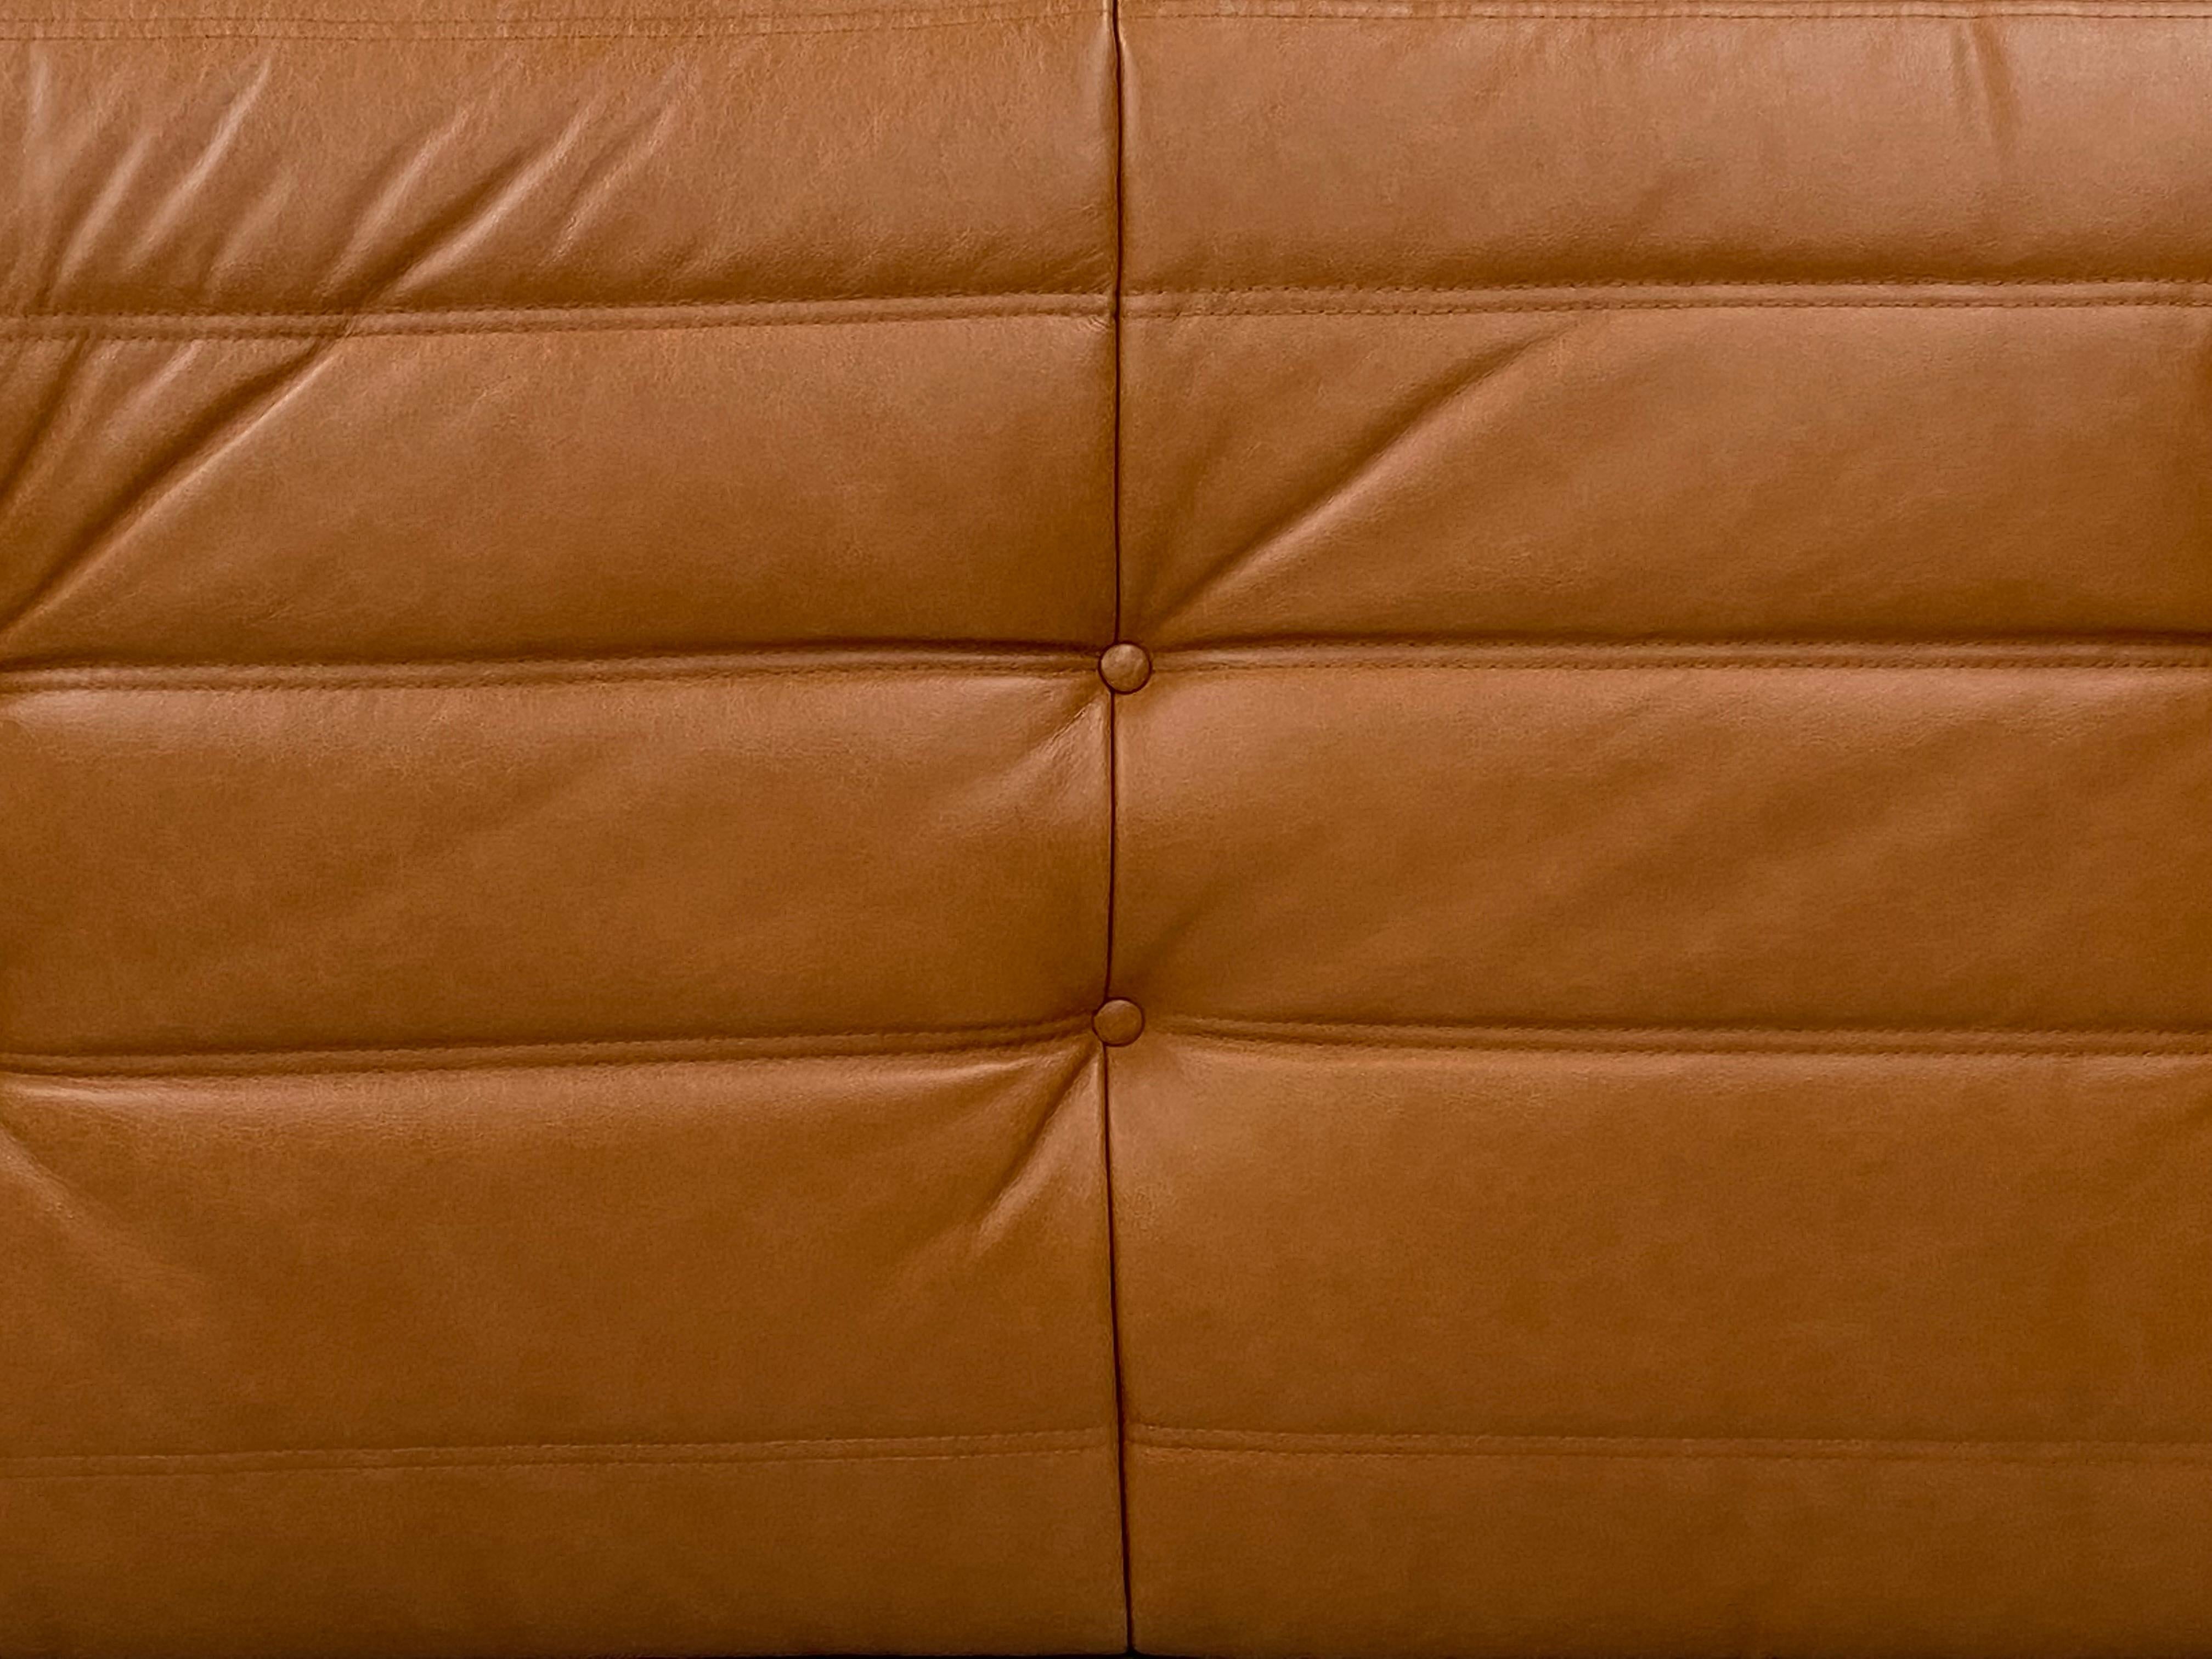 French Vintage Togo Sofa in Brown Leather by Michel Ducaroy for Ligne Roset. 1